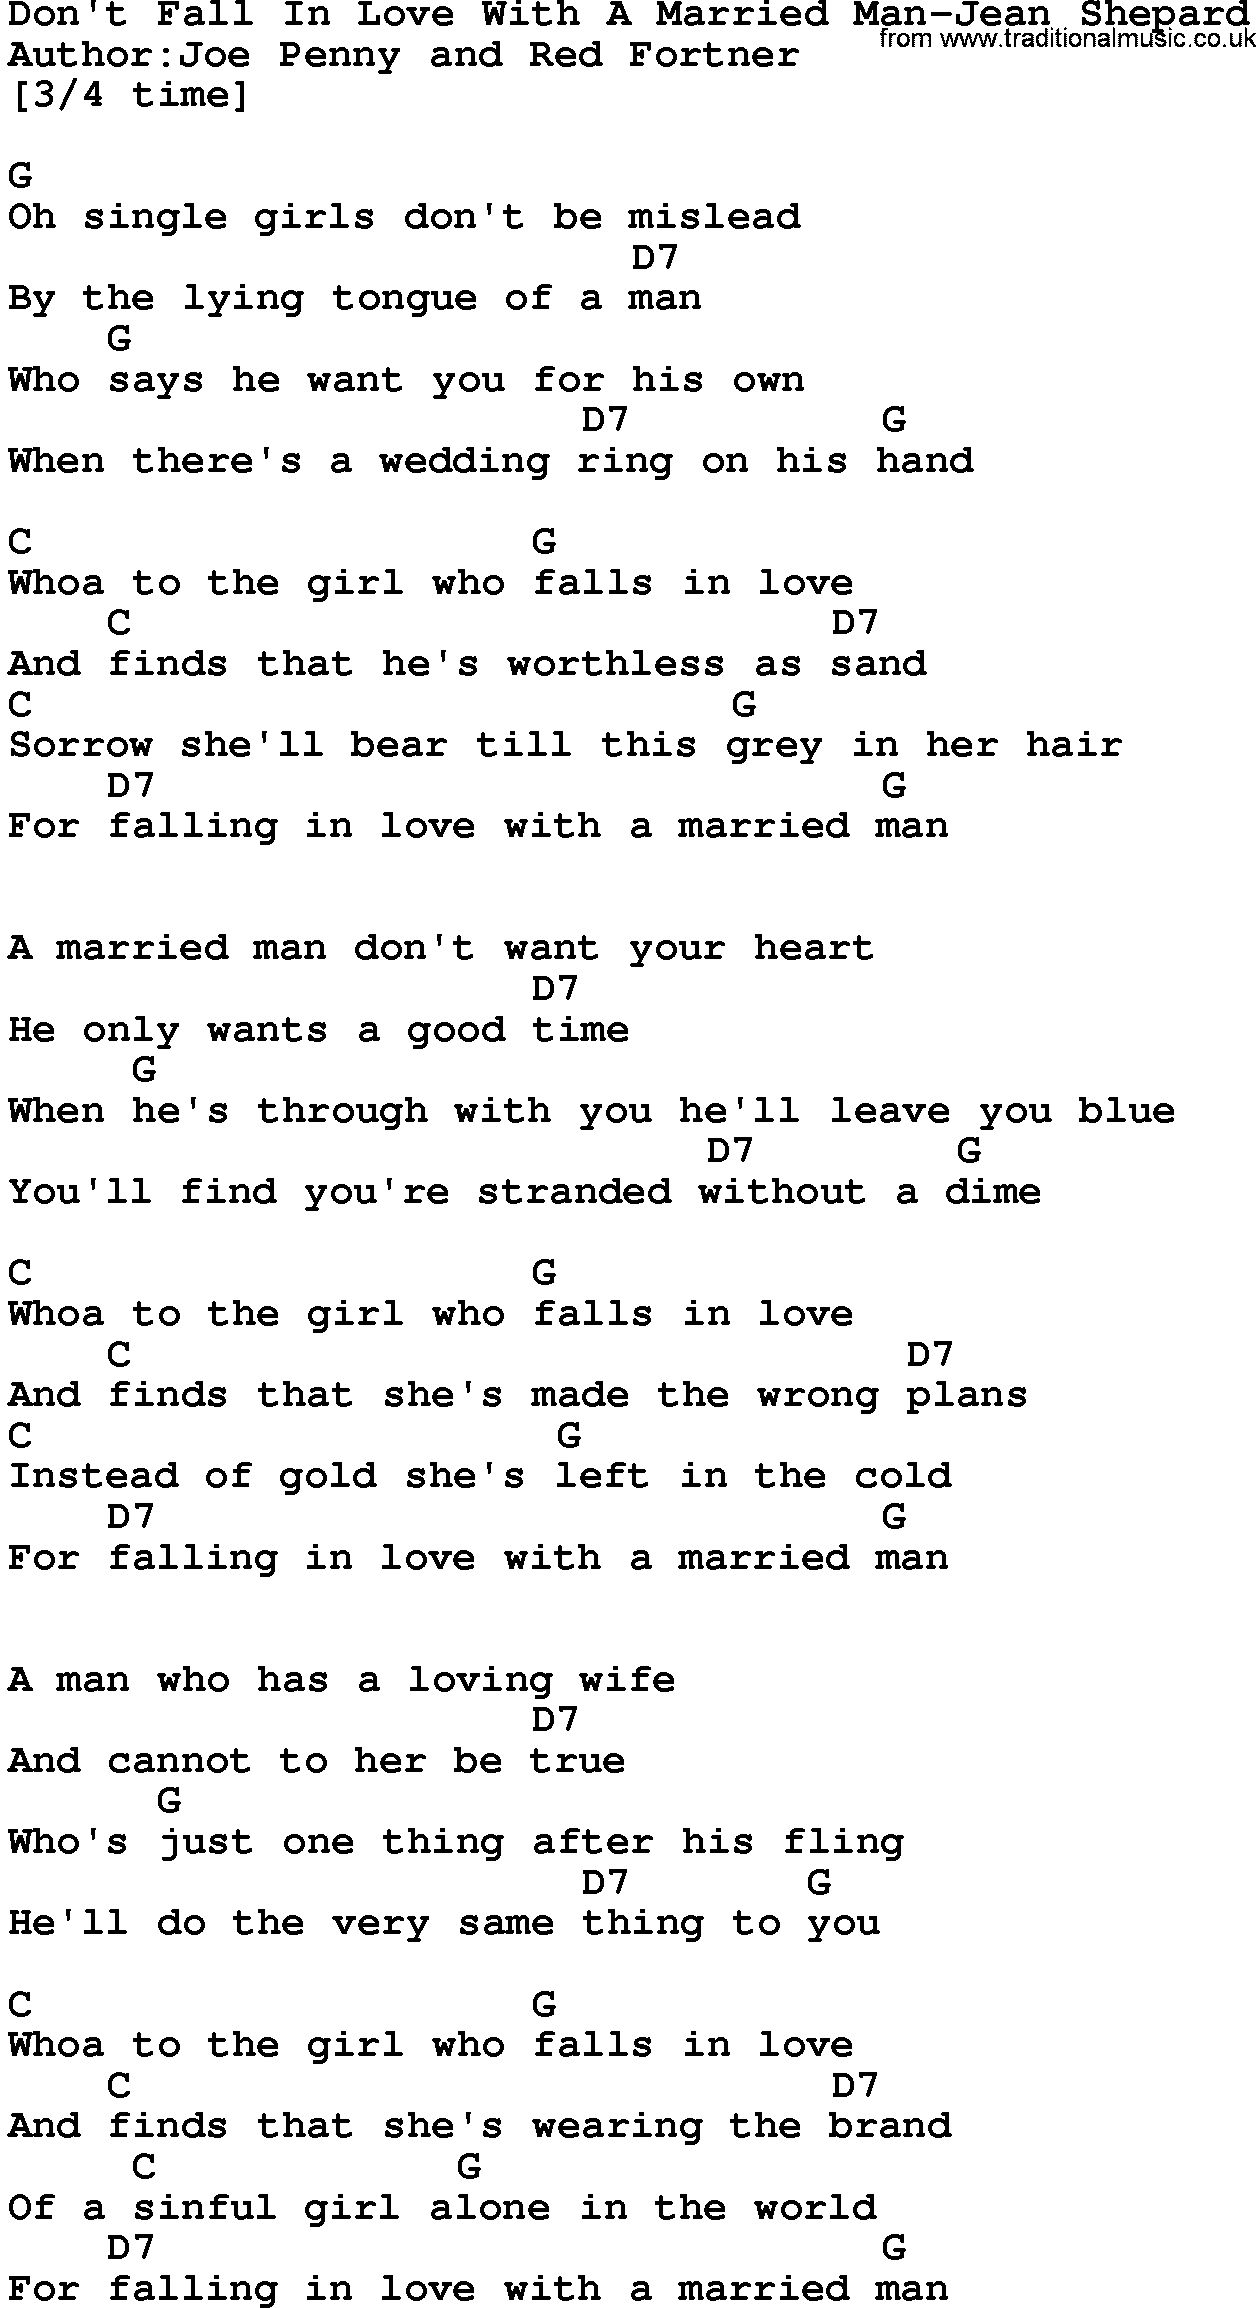 Country music song: Don't Fall In Love With A Married Man-Jean Shepard lyrics and chords